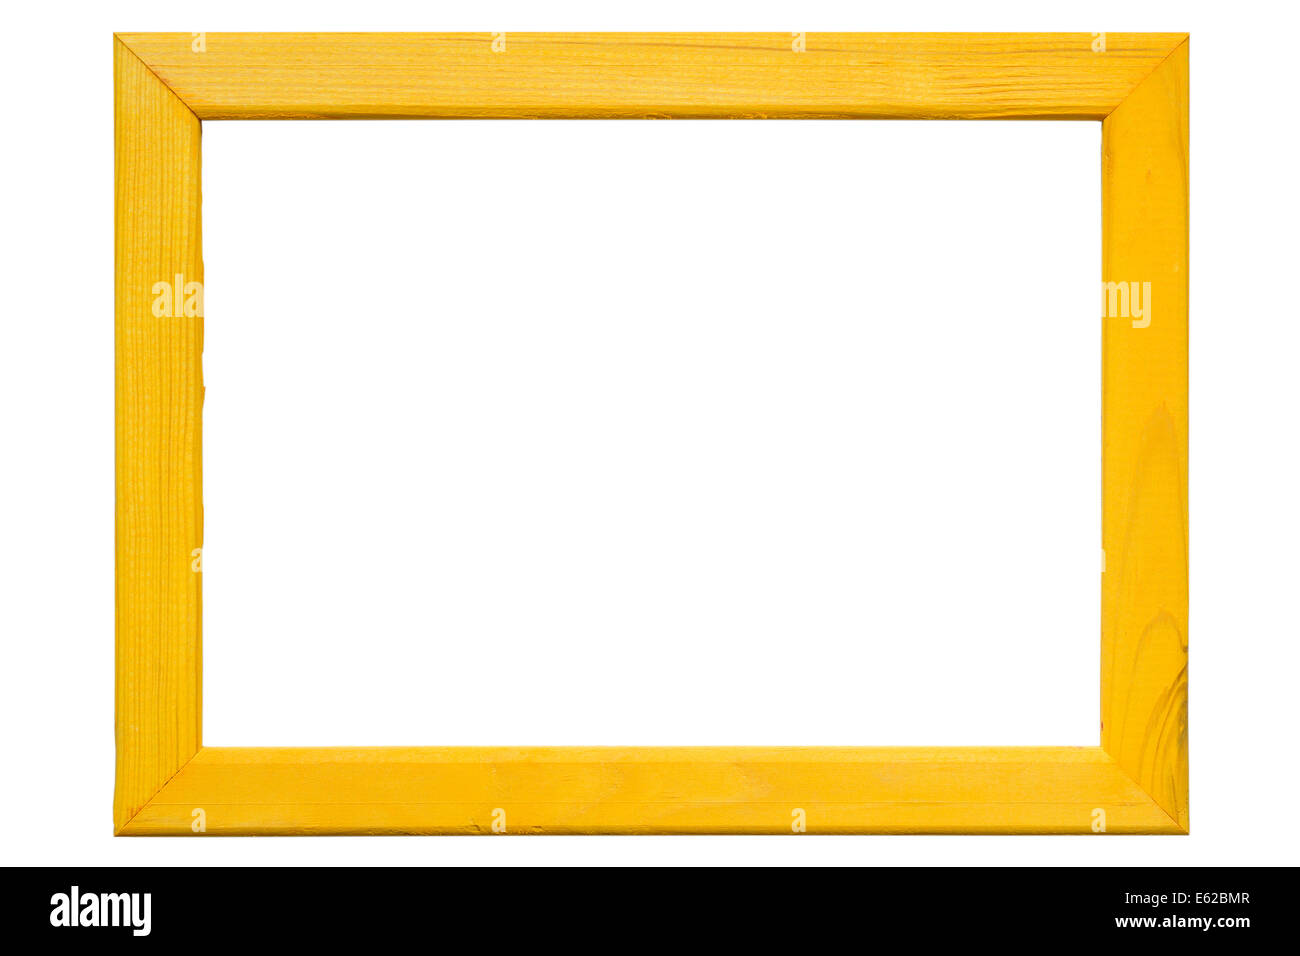 yellow wooden frame on the white background Stock Photo